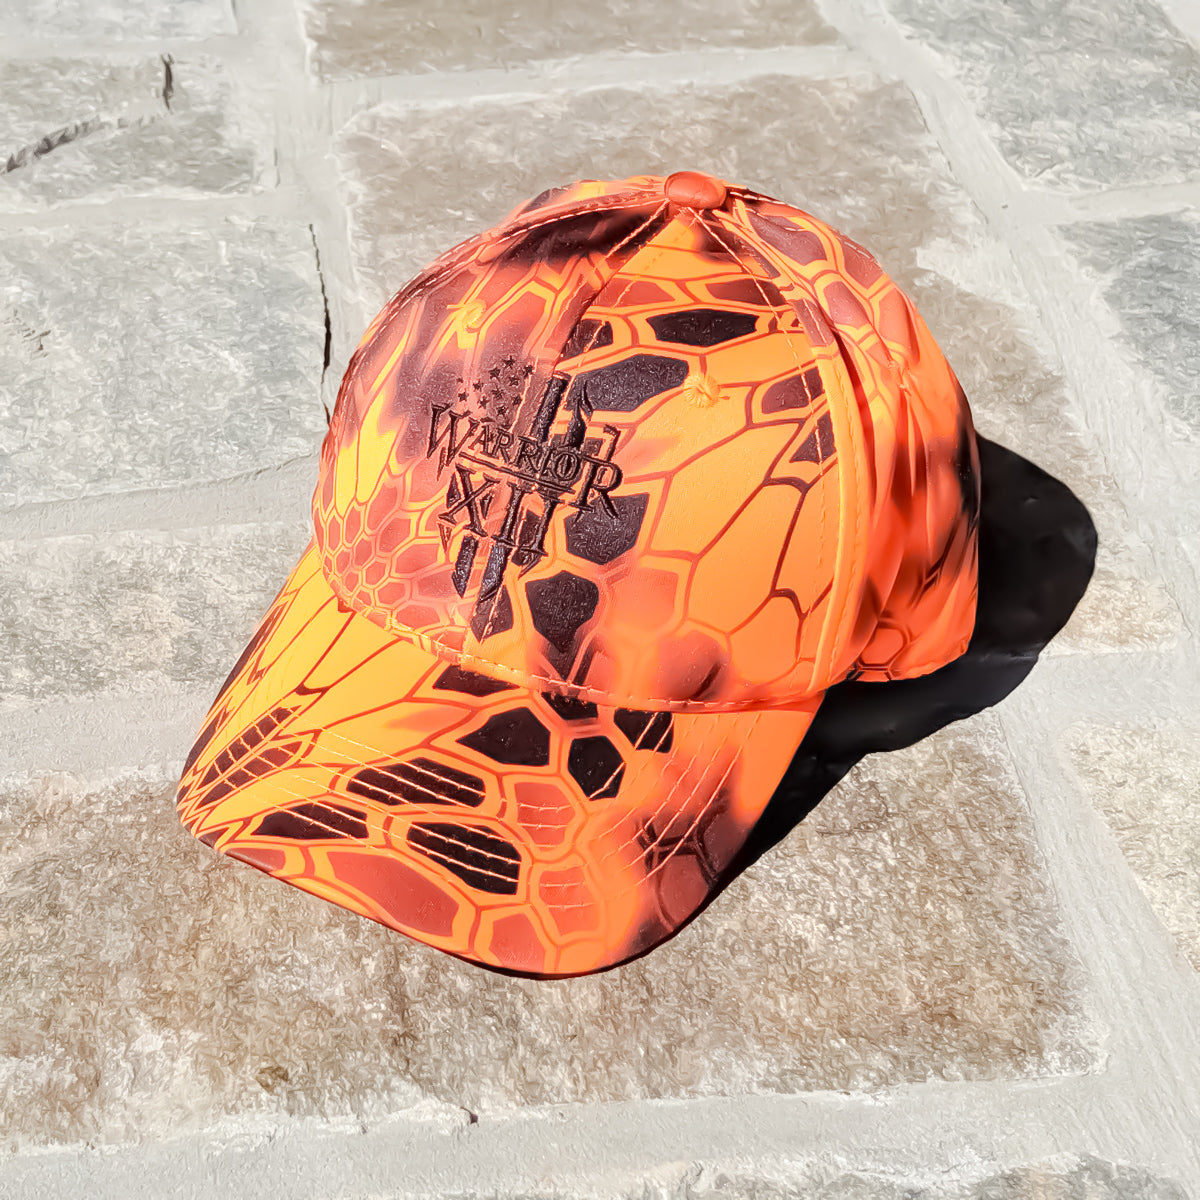 A Warrior hat that features the Warrior 12 shield embroidered on a Kryptek Inferno camo strapback.